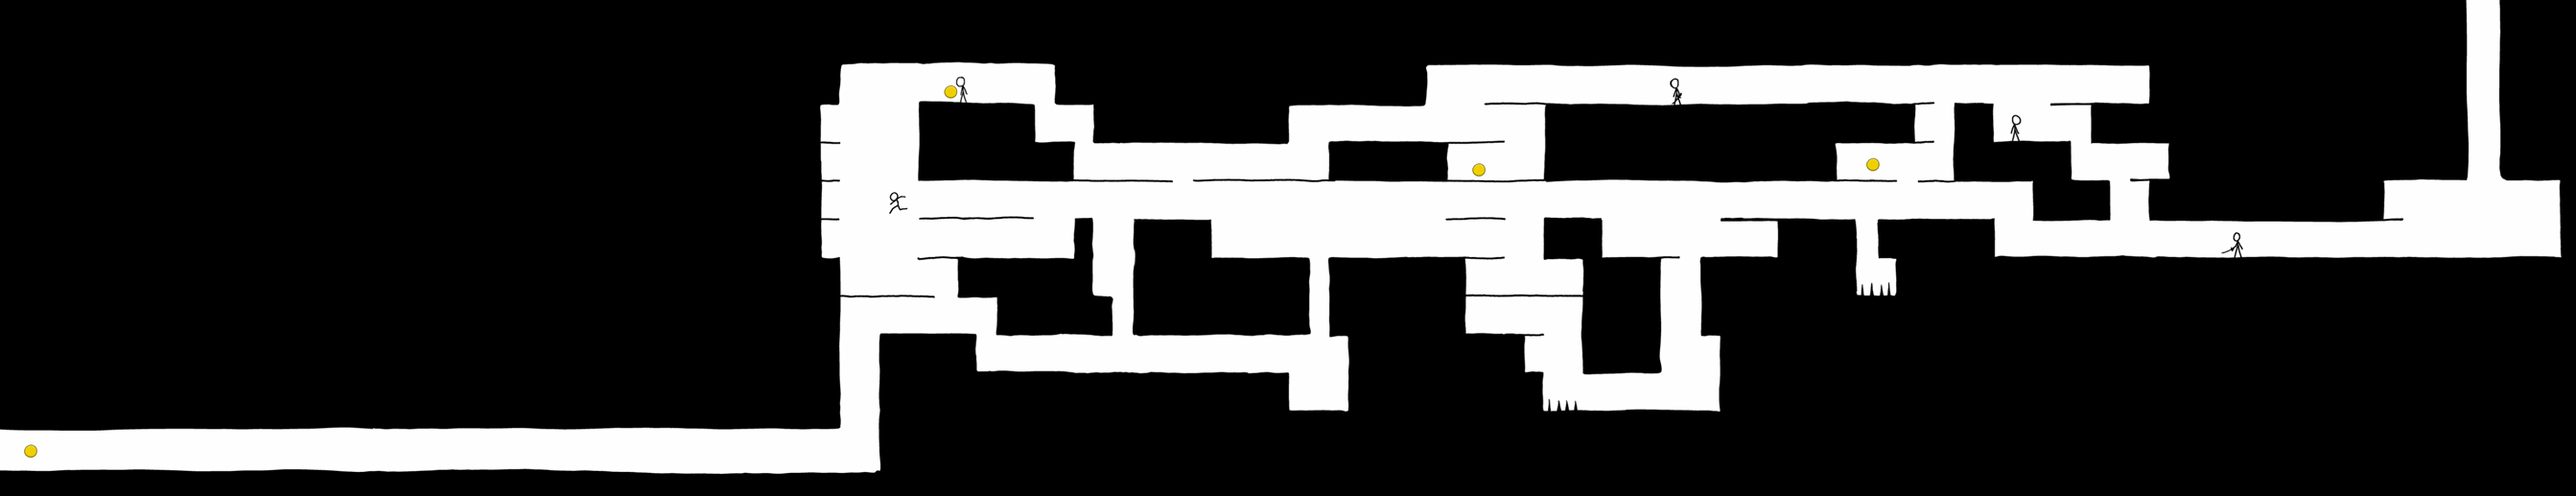 1608 Entire Prince of Persia maze with both exits.png